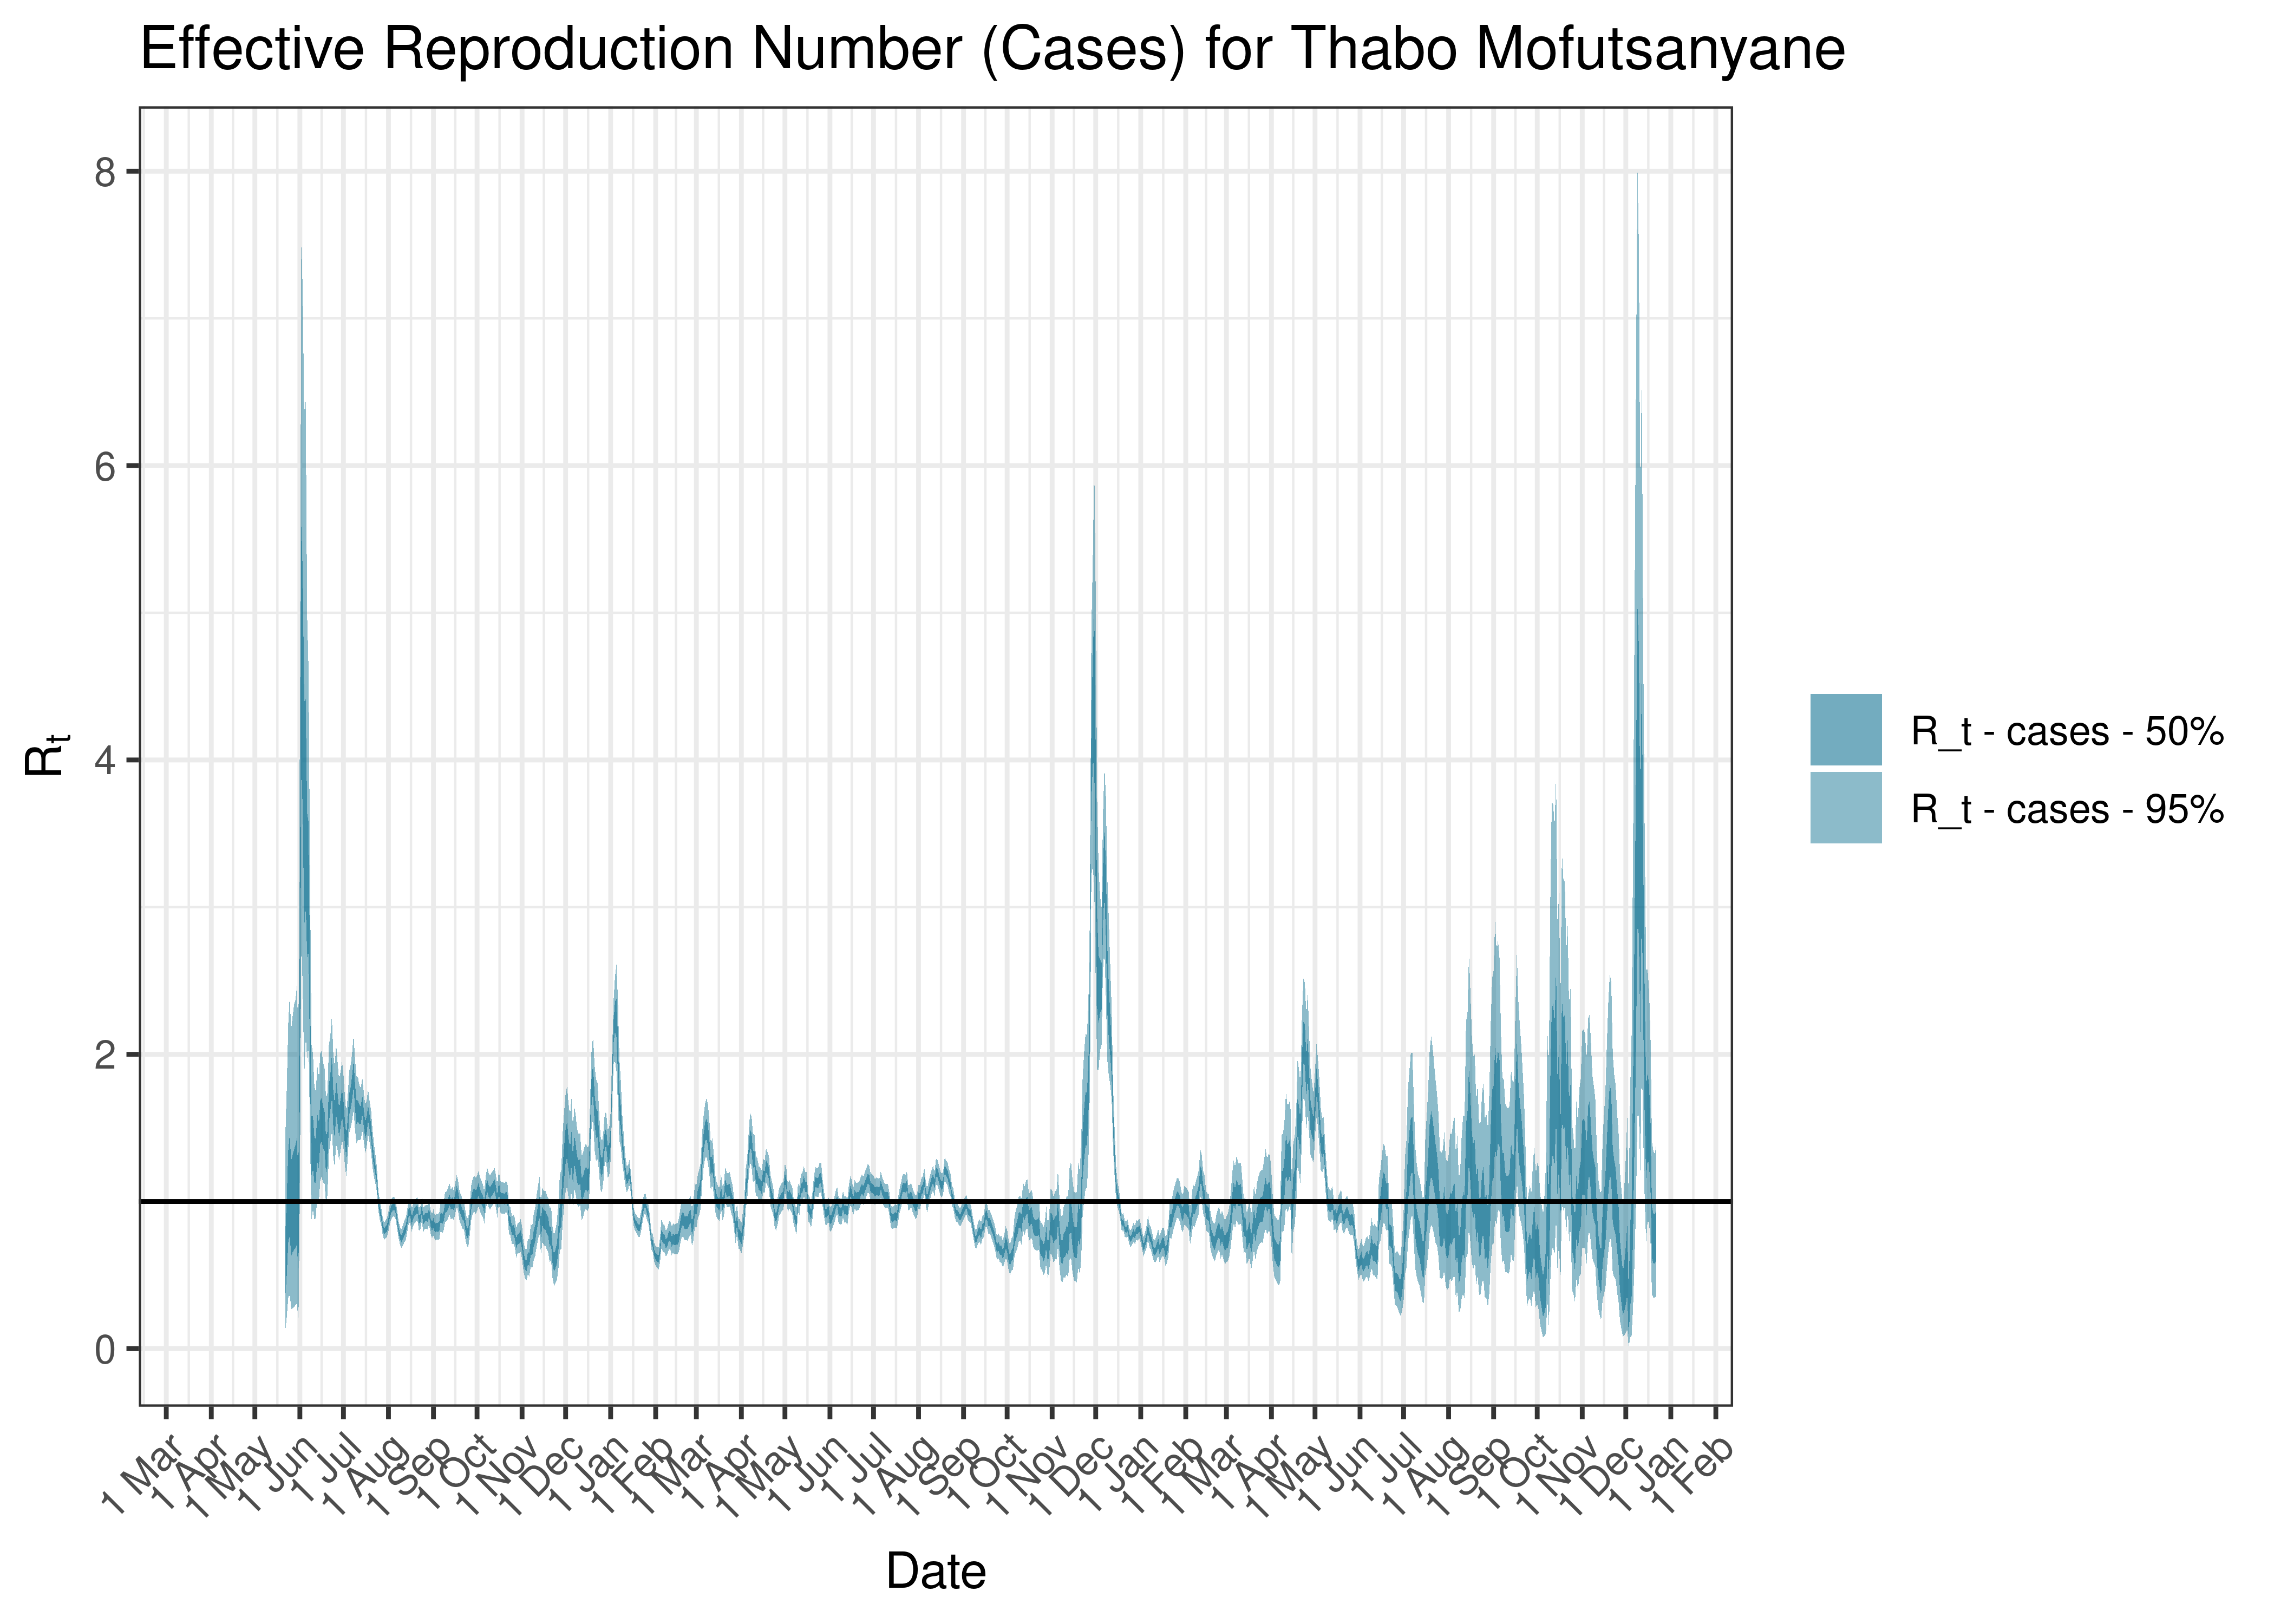 Estimated Effective Reproduction Number Based on Cases for Thabo Mofutsanyane since 1 April 2020